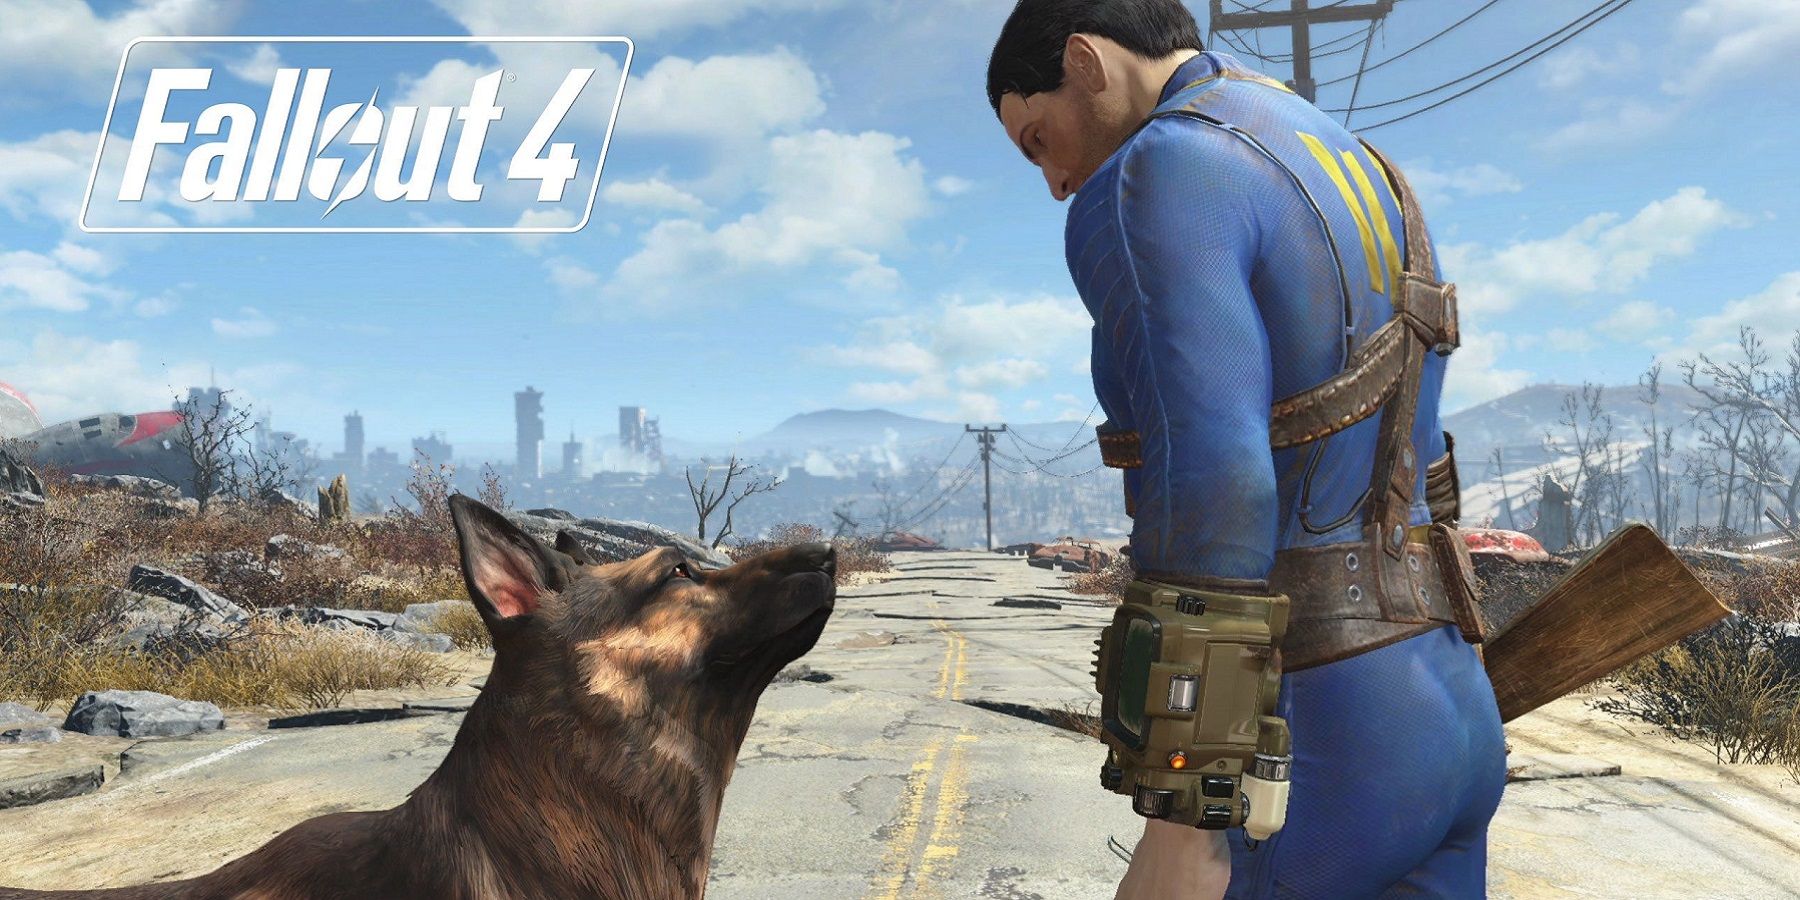 Image from Fallout 4 showing the vault dweller looking down at Dogmeat.